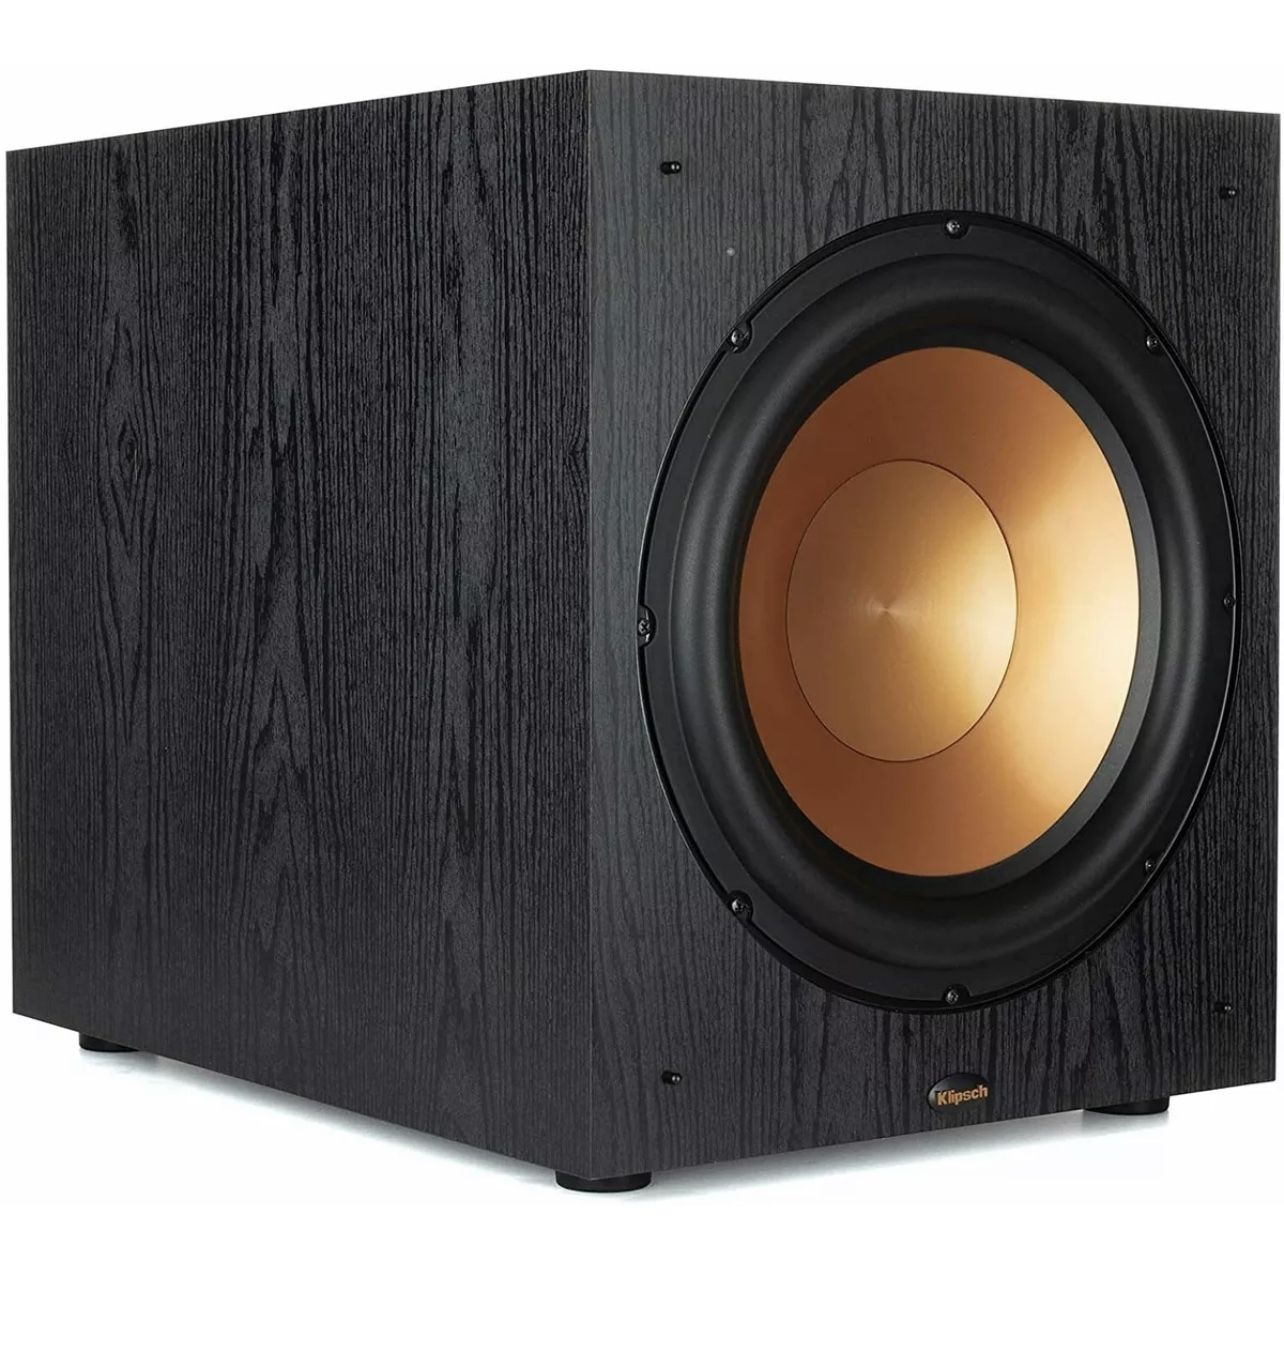 Klipsch Synergy Black Label Sub-120 Subwoofer with Spun Copper Front-Firing Cerametallic Woofers and a 12-inch, Front-Firing Driver